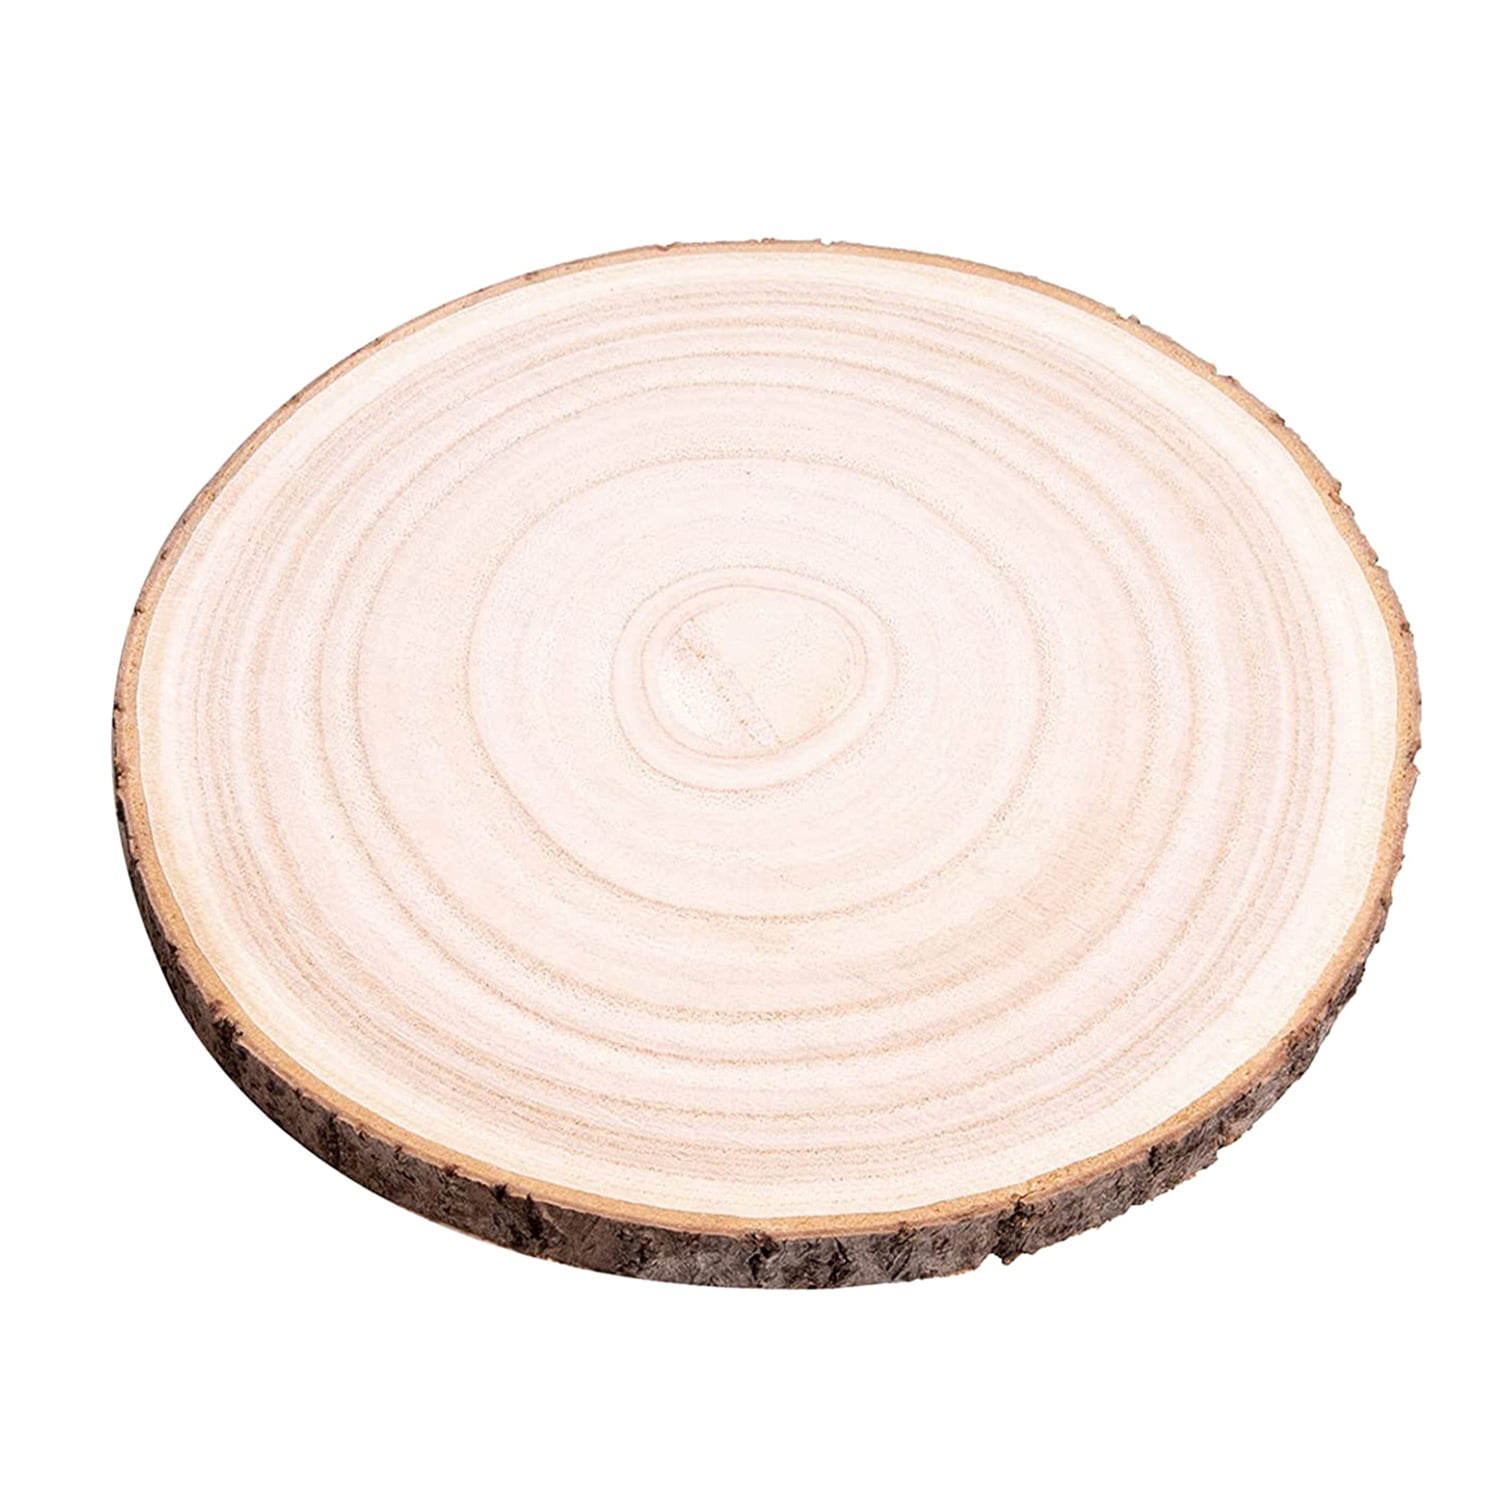  Wood Rounds 4 Pcs 10-12 Inch Large Wood Slices for Centerpieces  Unfinished Rustic Wood Slices for Wedding,Table Centerpieces,Décor,Crafts,DIY  Projects : Home & Kitchen